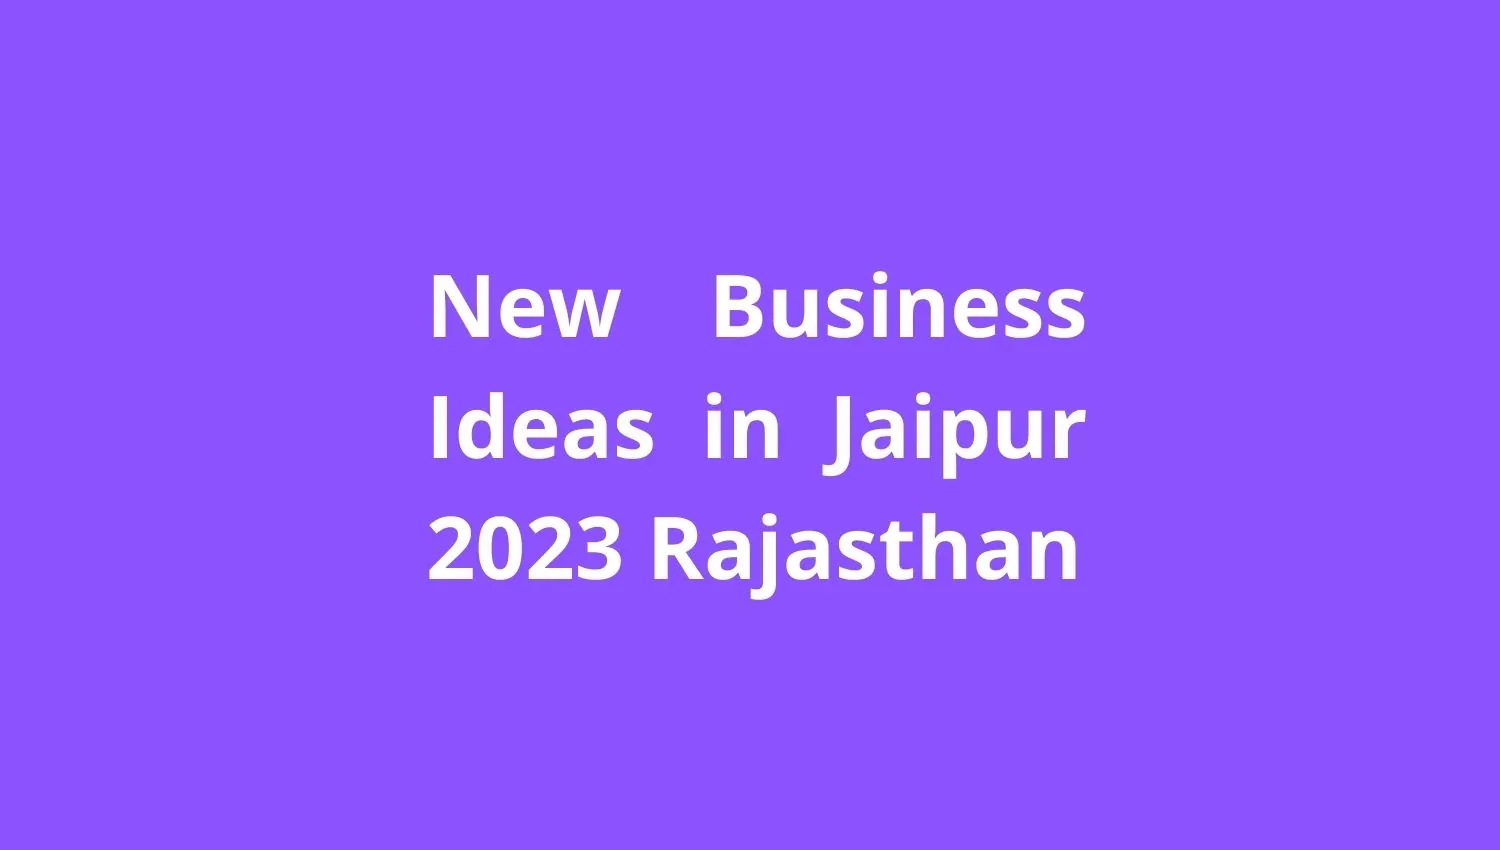 New Business Ideas in Jaipur with Low Investment 2023